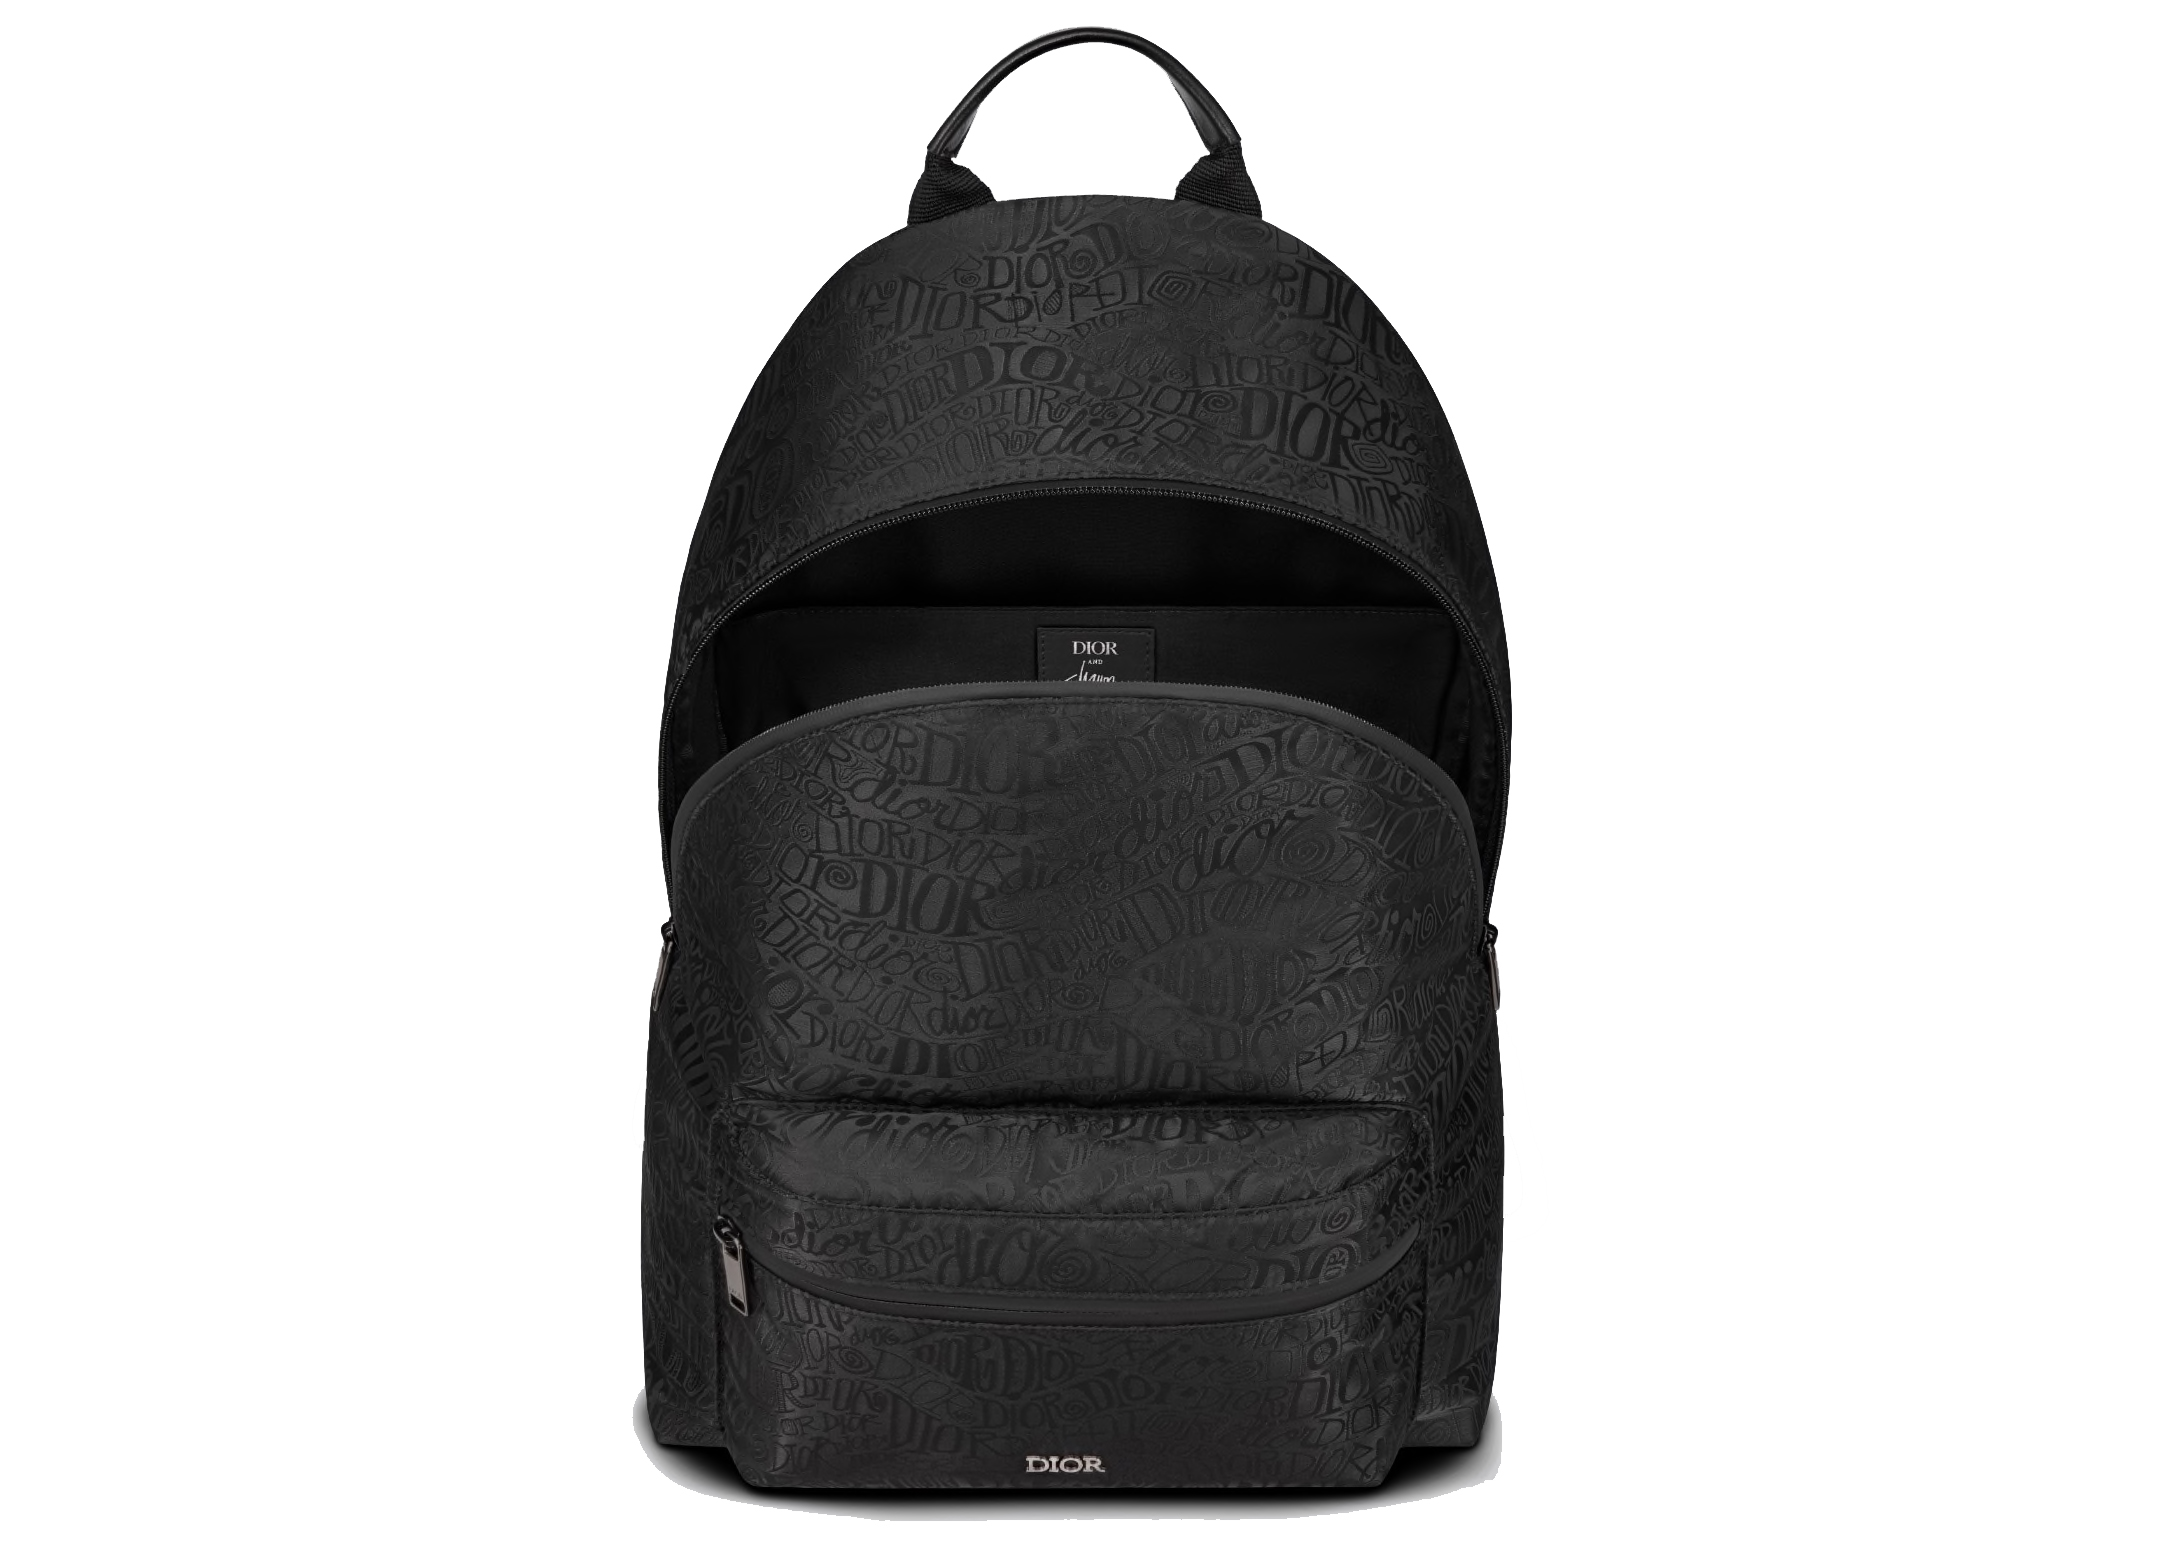 Dior And Shawn Rider Backpack Black in Nylon Jacquard with